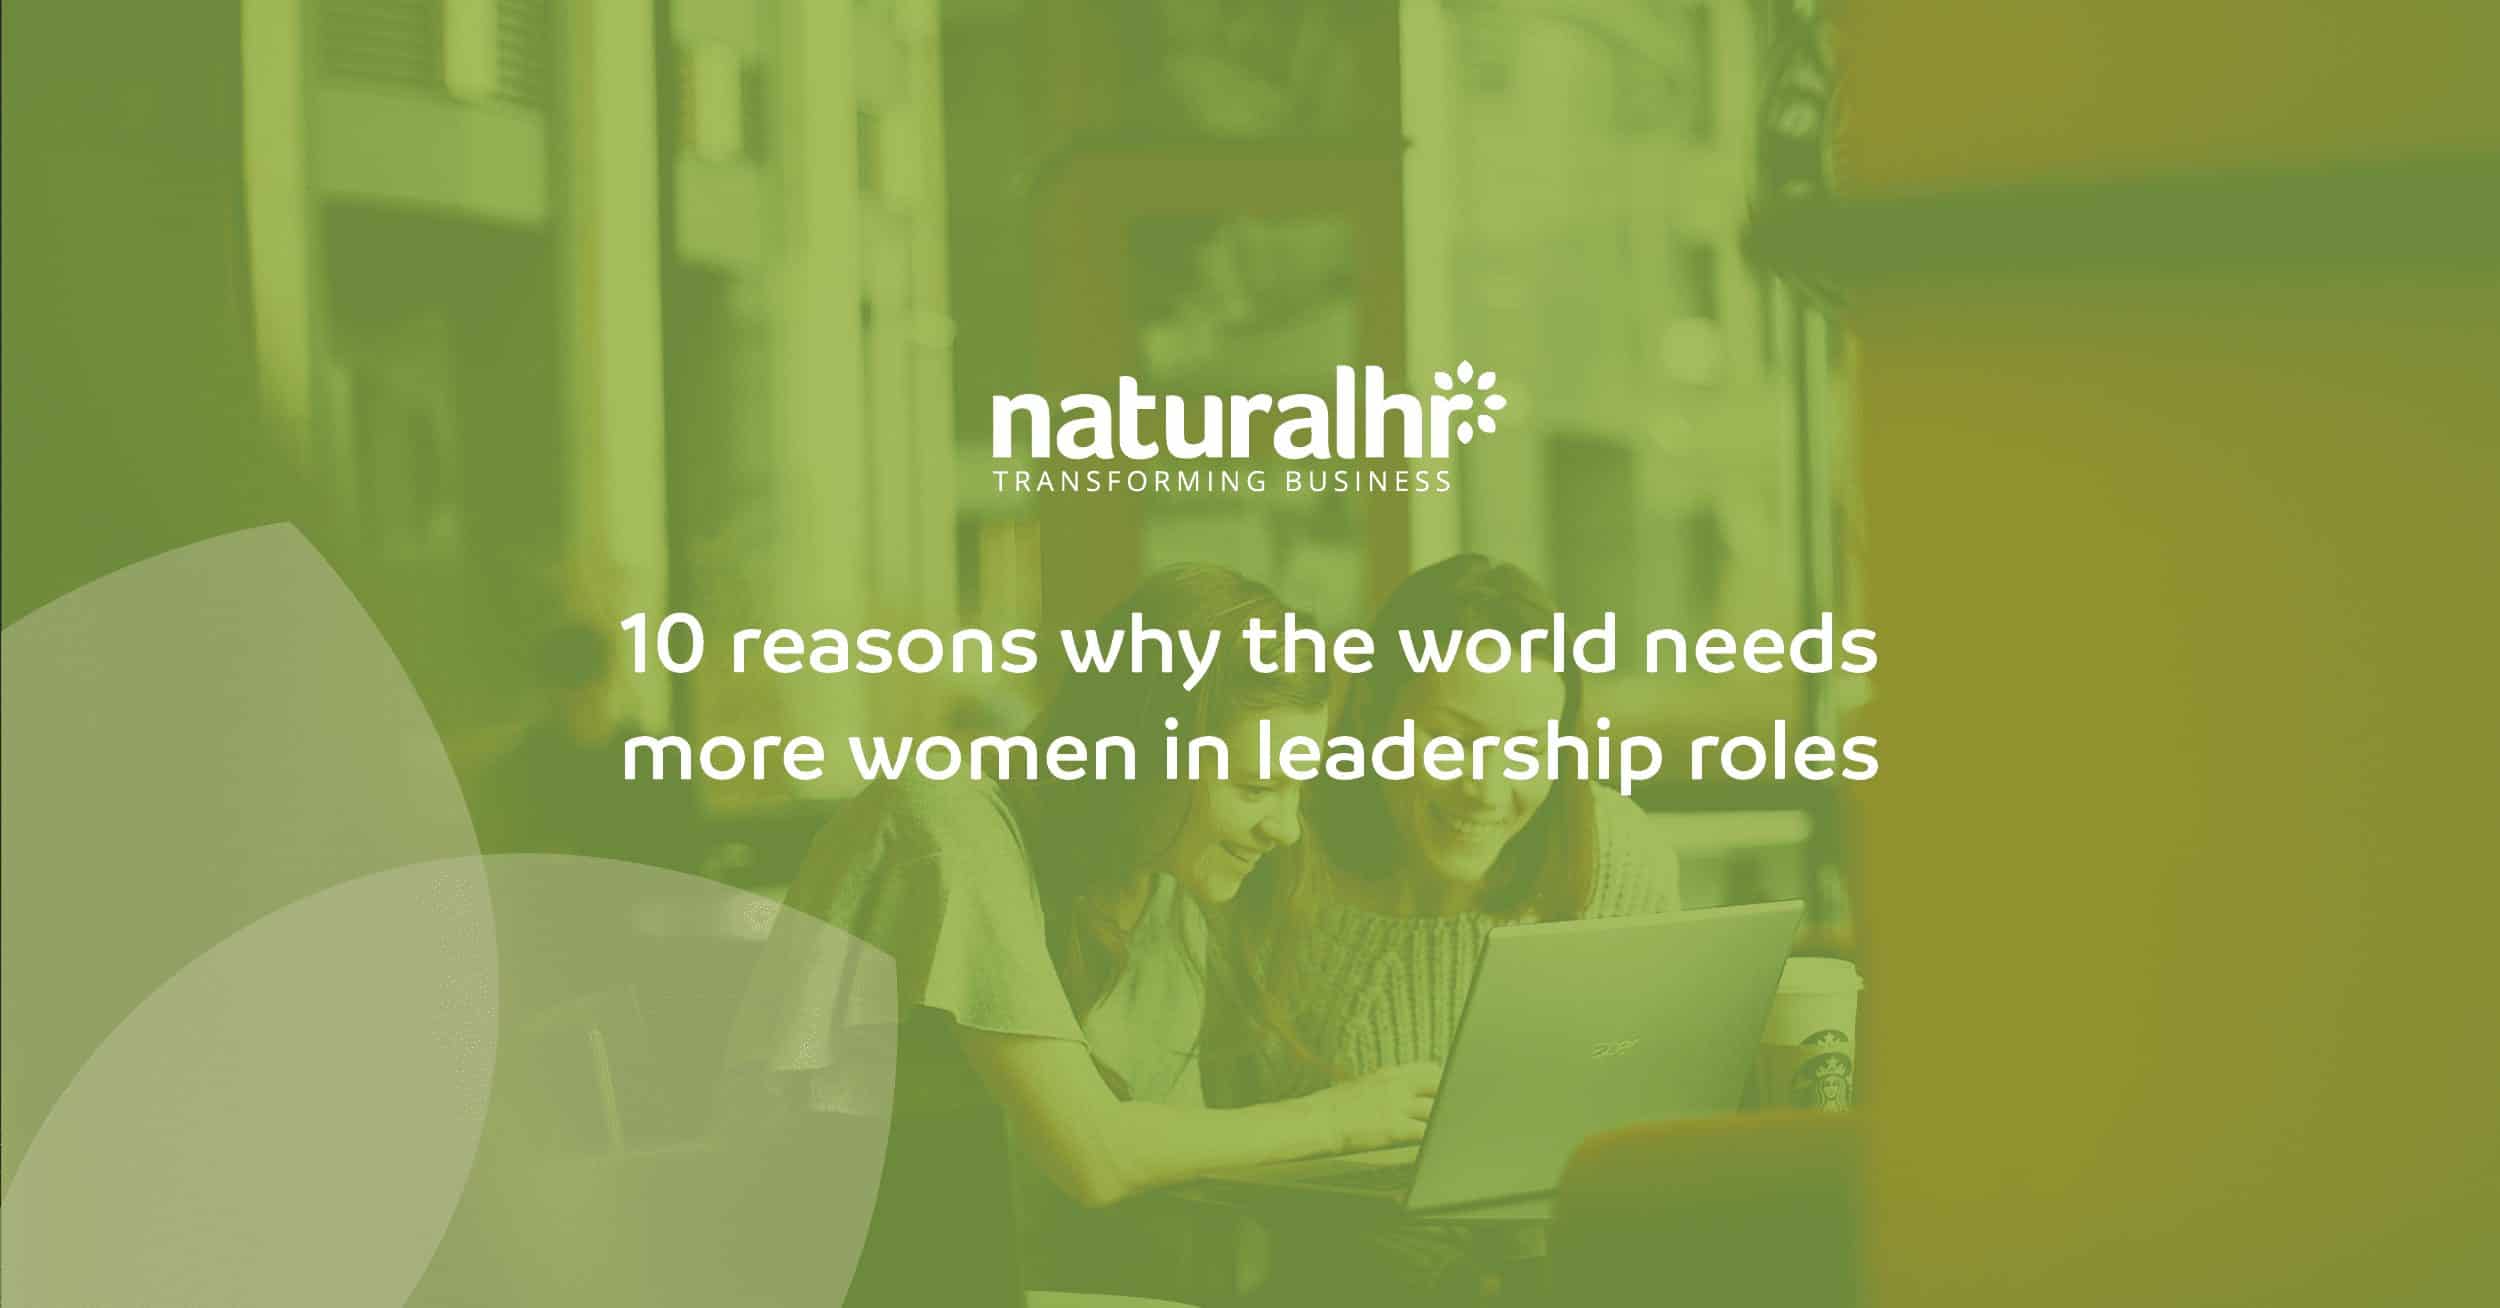 10 reasons why the world needs more women in leadership roles